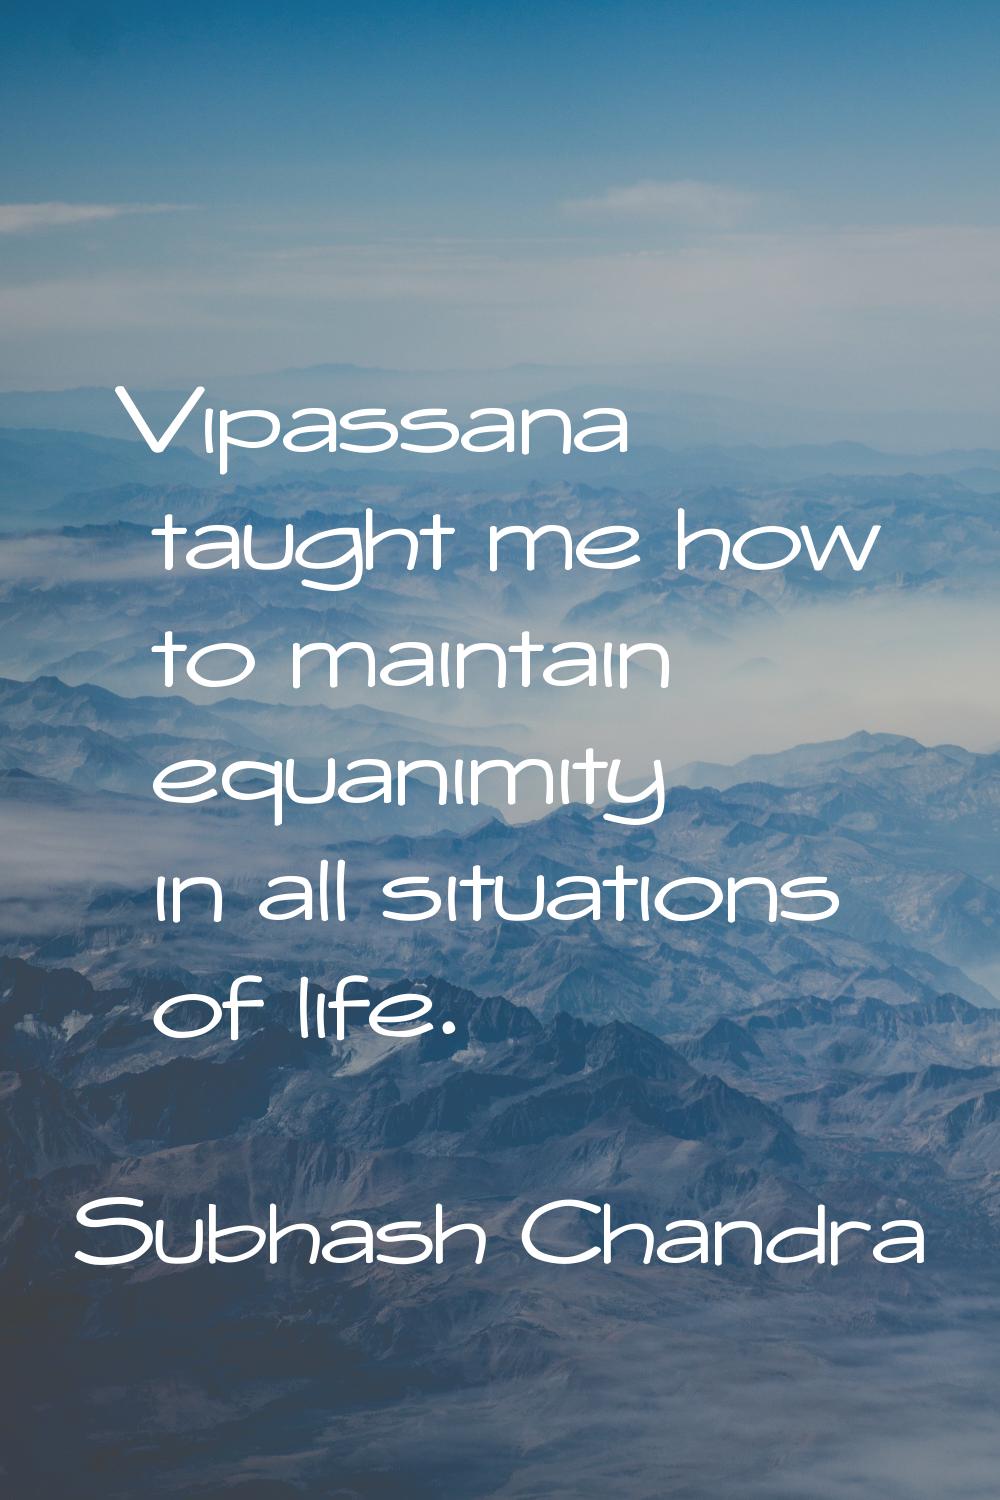 Vipassana taught me how to maintain equanimity in all situations of life.